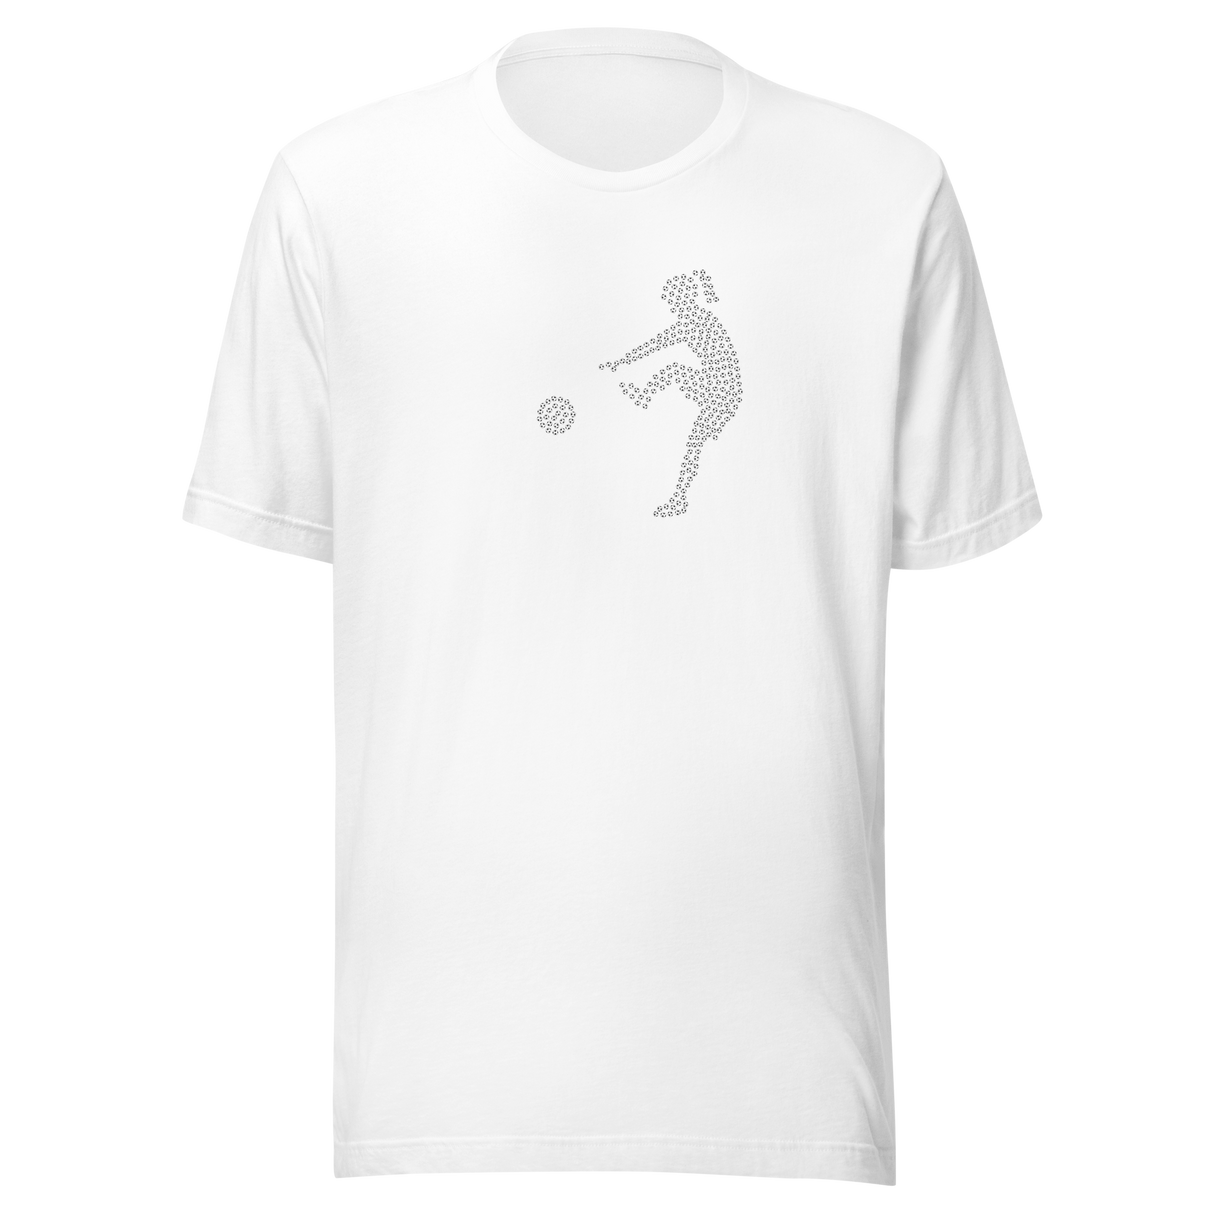 girl-playing-soccer-silhouette-image-made-from-many-soccer-balls-soccer-tee-girls-t-shirt-football-tee-sports-t-shirt-gift-tee#color_white